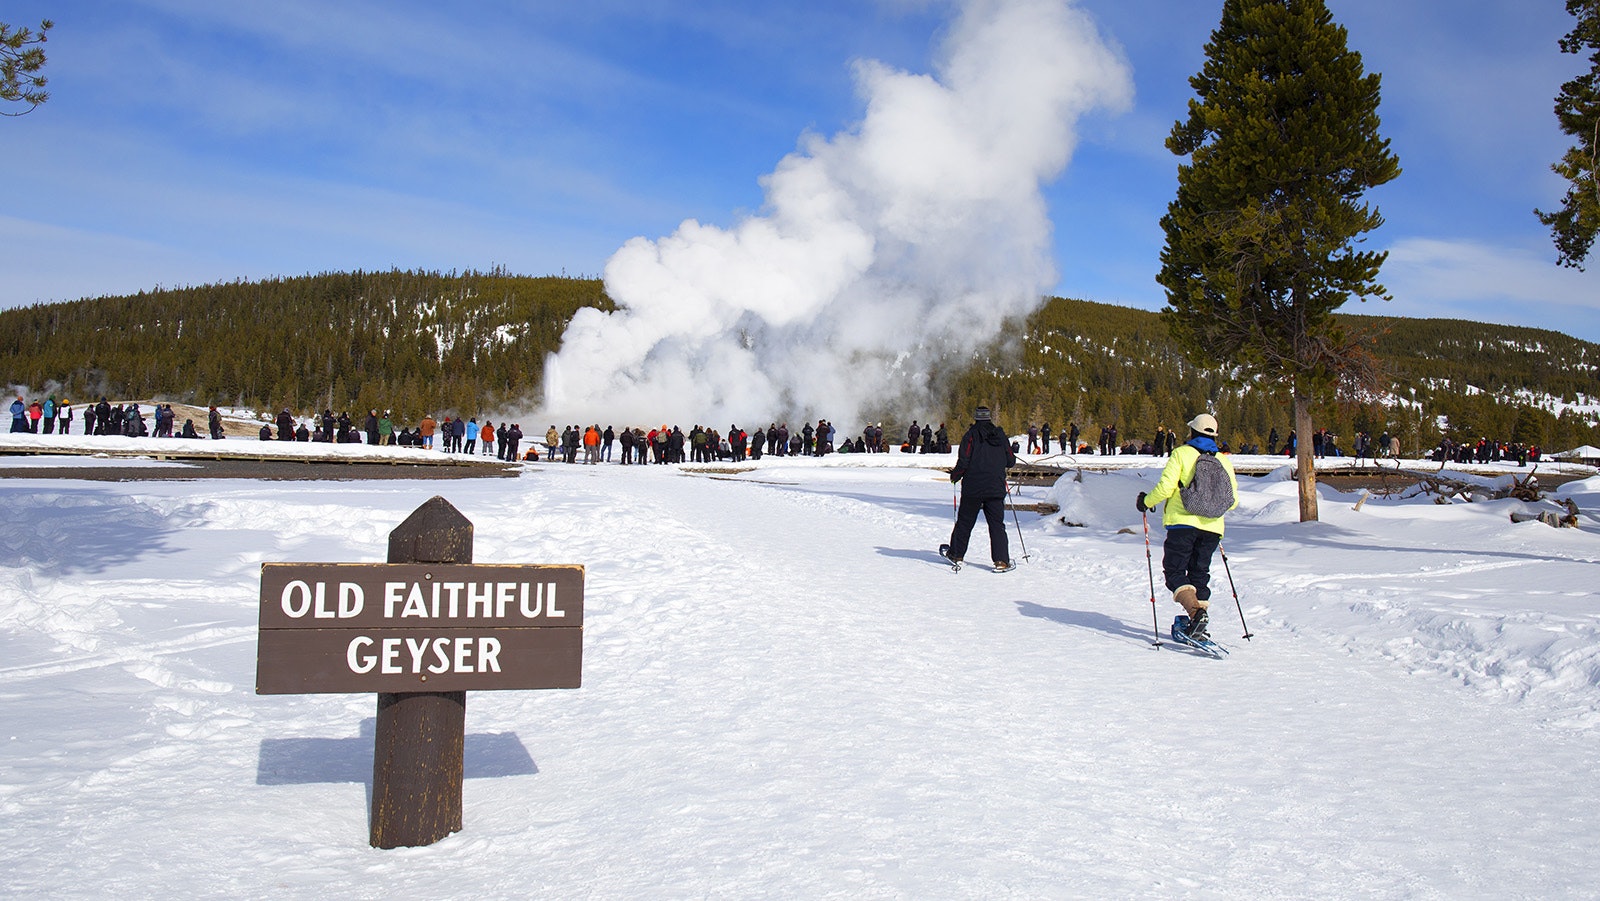 While many of the services and concessions may be shut down in the offseason, Yellowstone itself is open for visitation year-round.